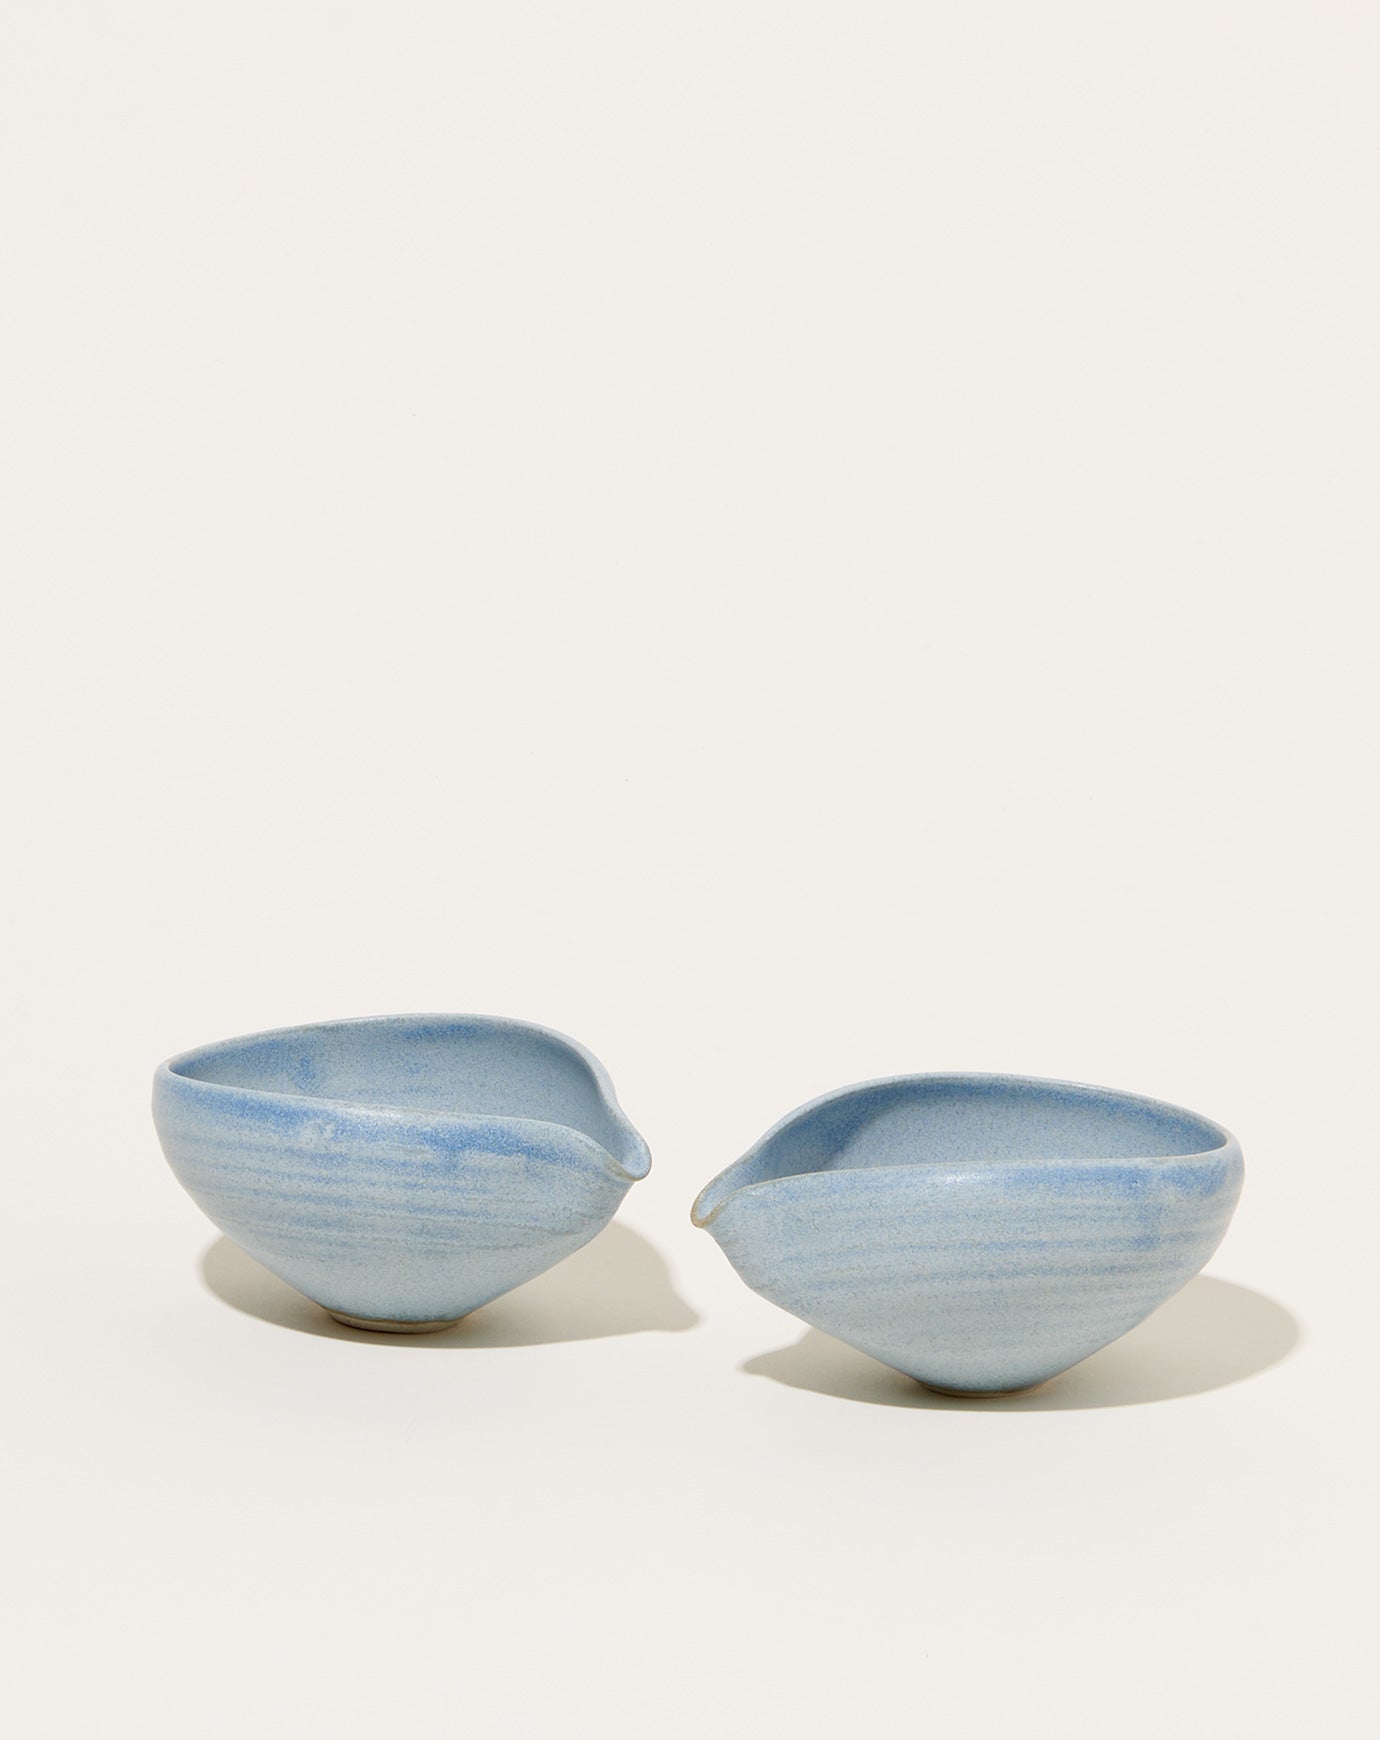 Monohanako Spouted Egg Bowl in Blue Jeans